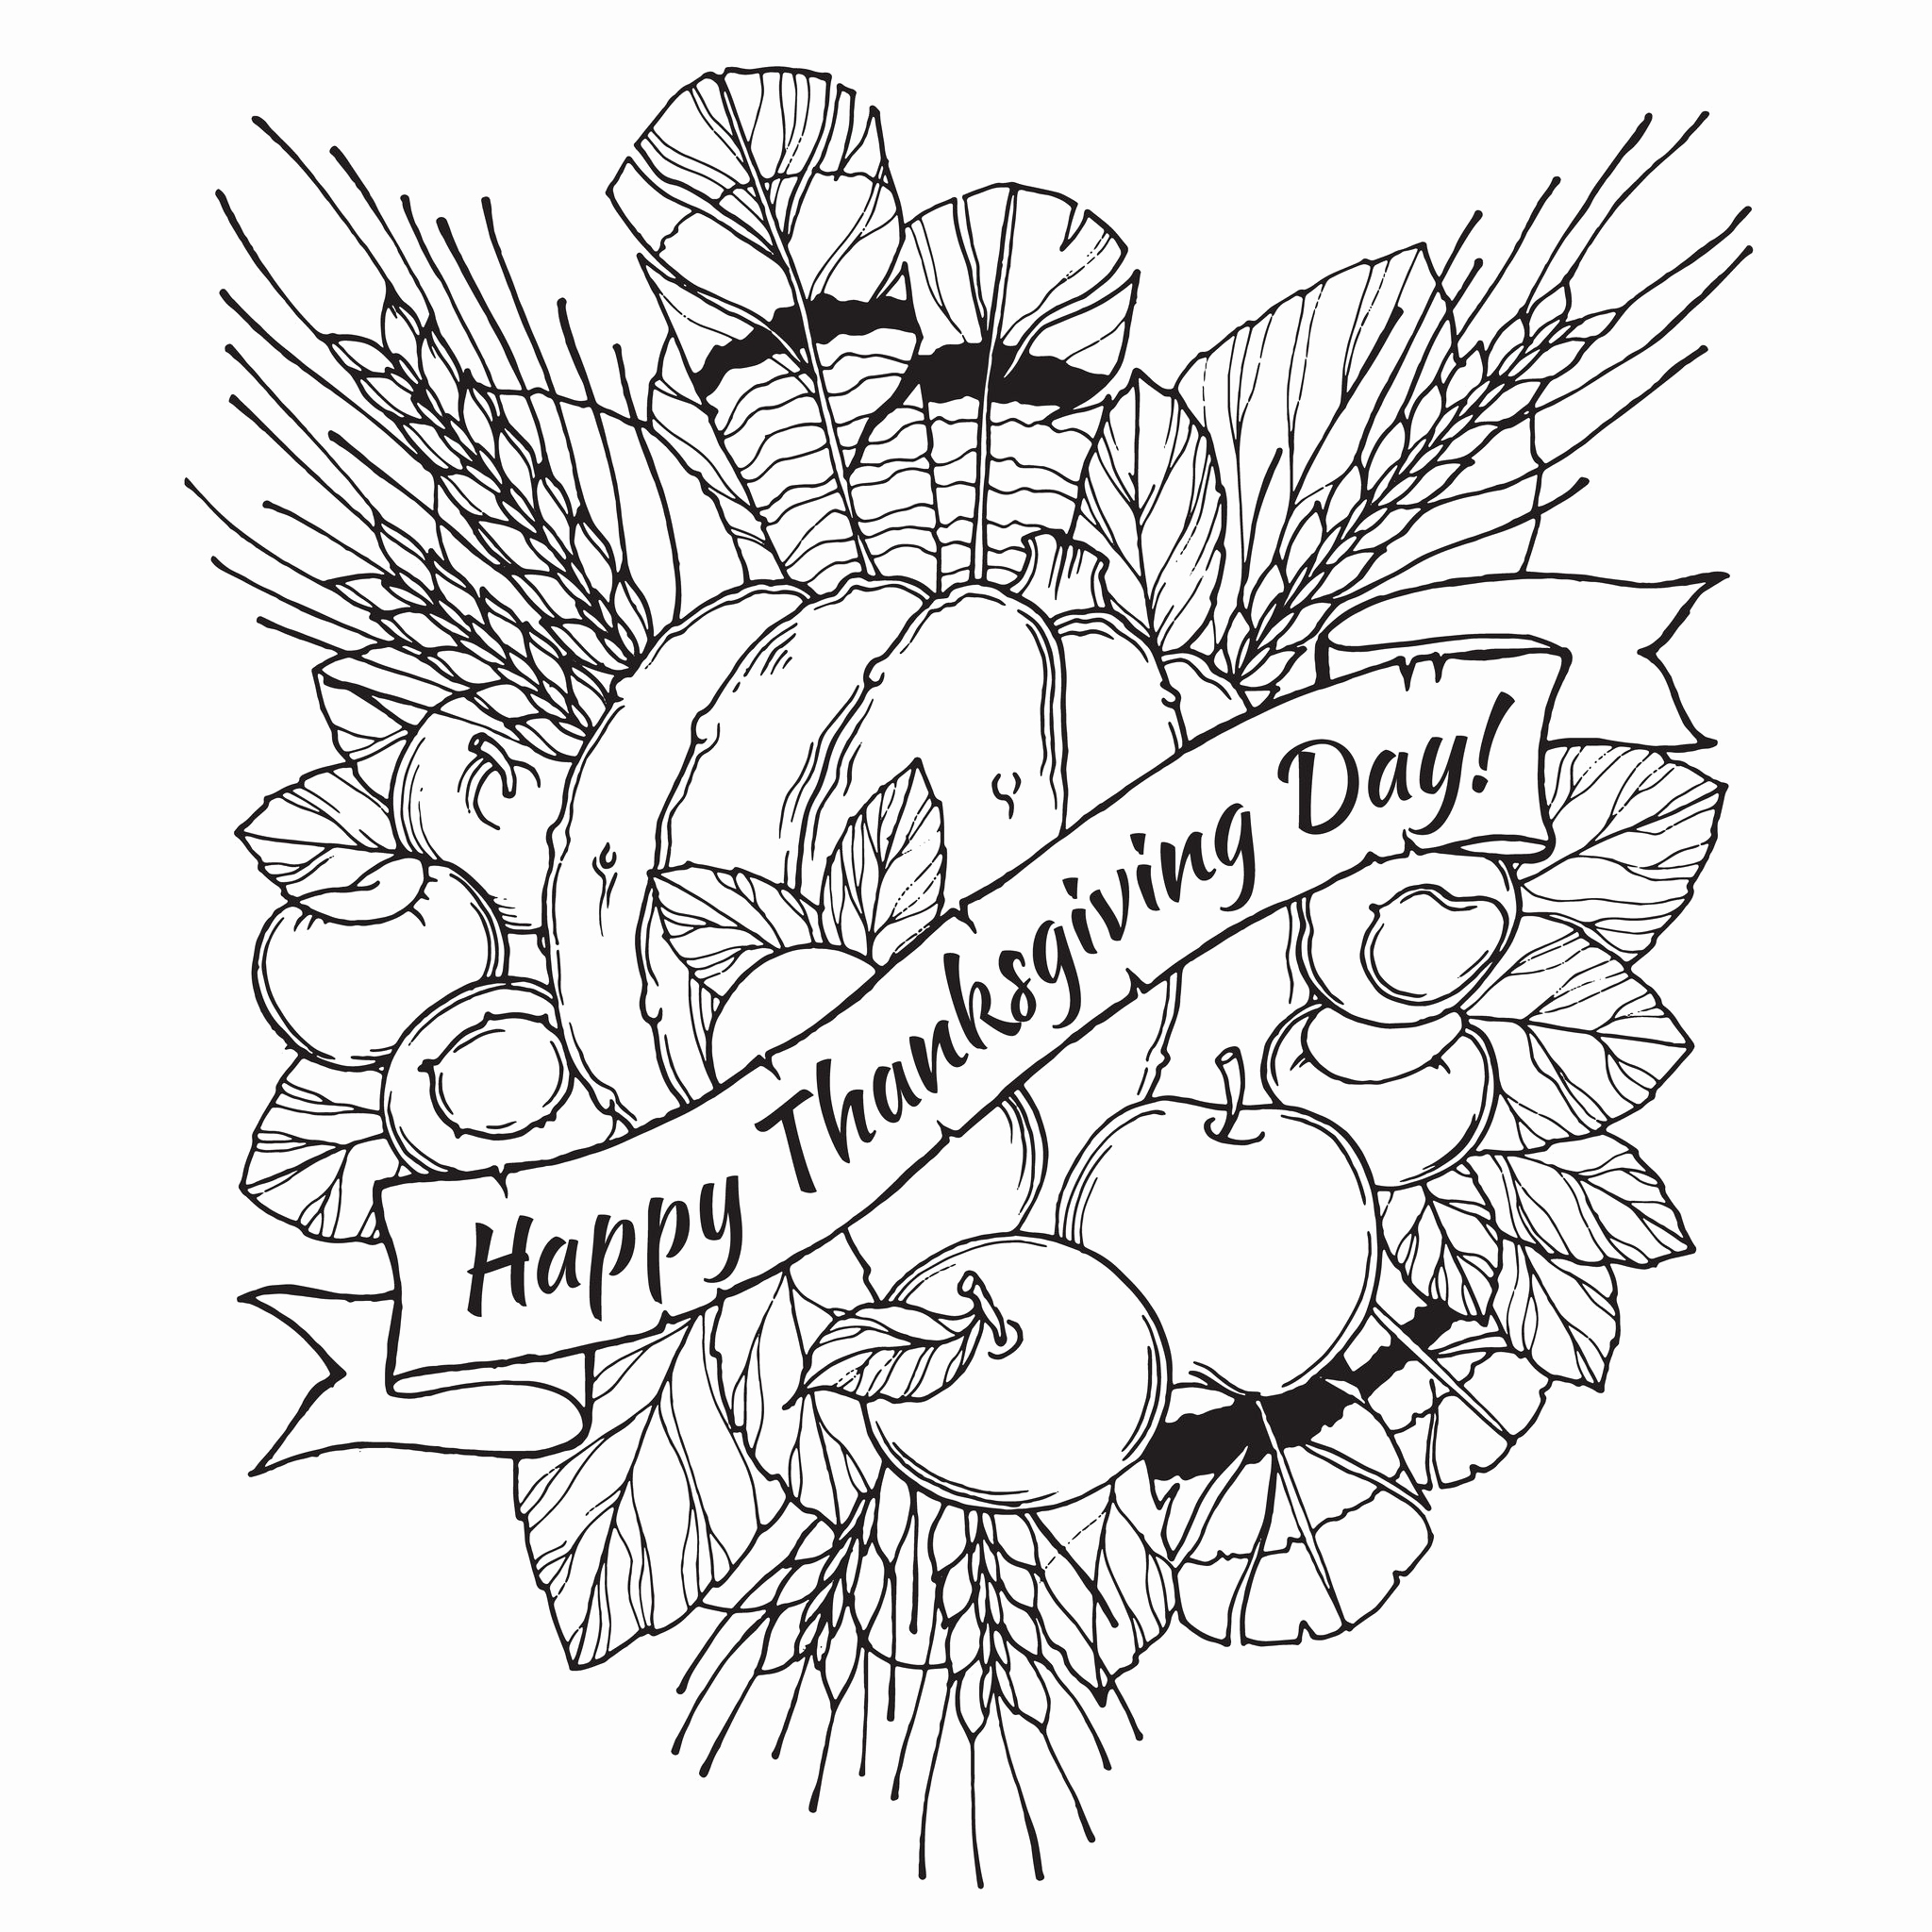 Thankful Coloring Pages at GetColorings.com | Free printable colorings